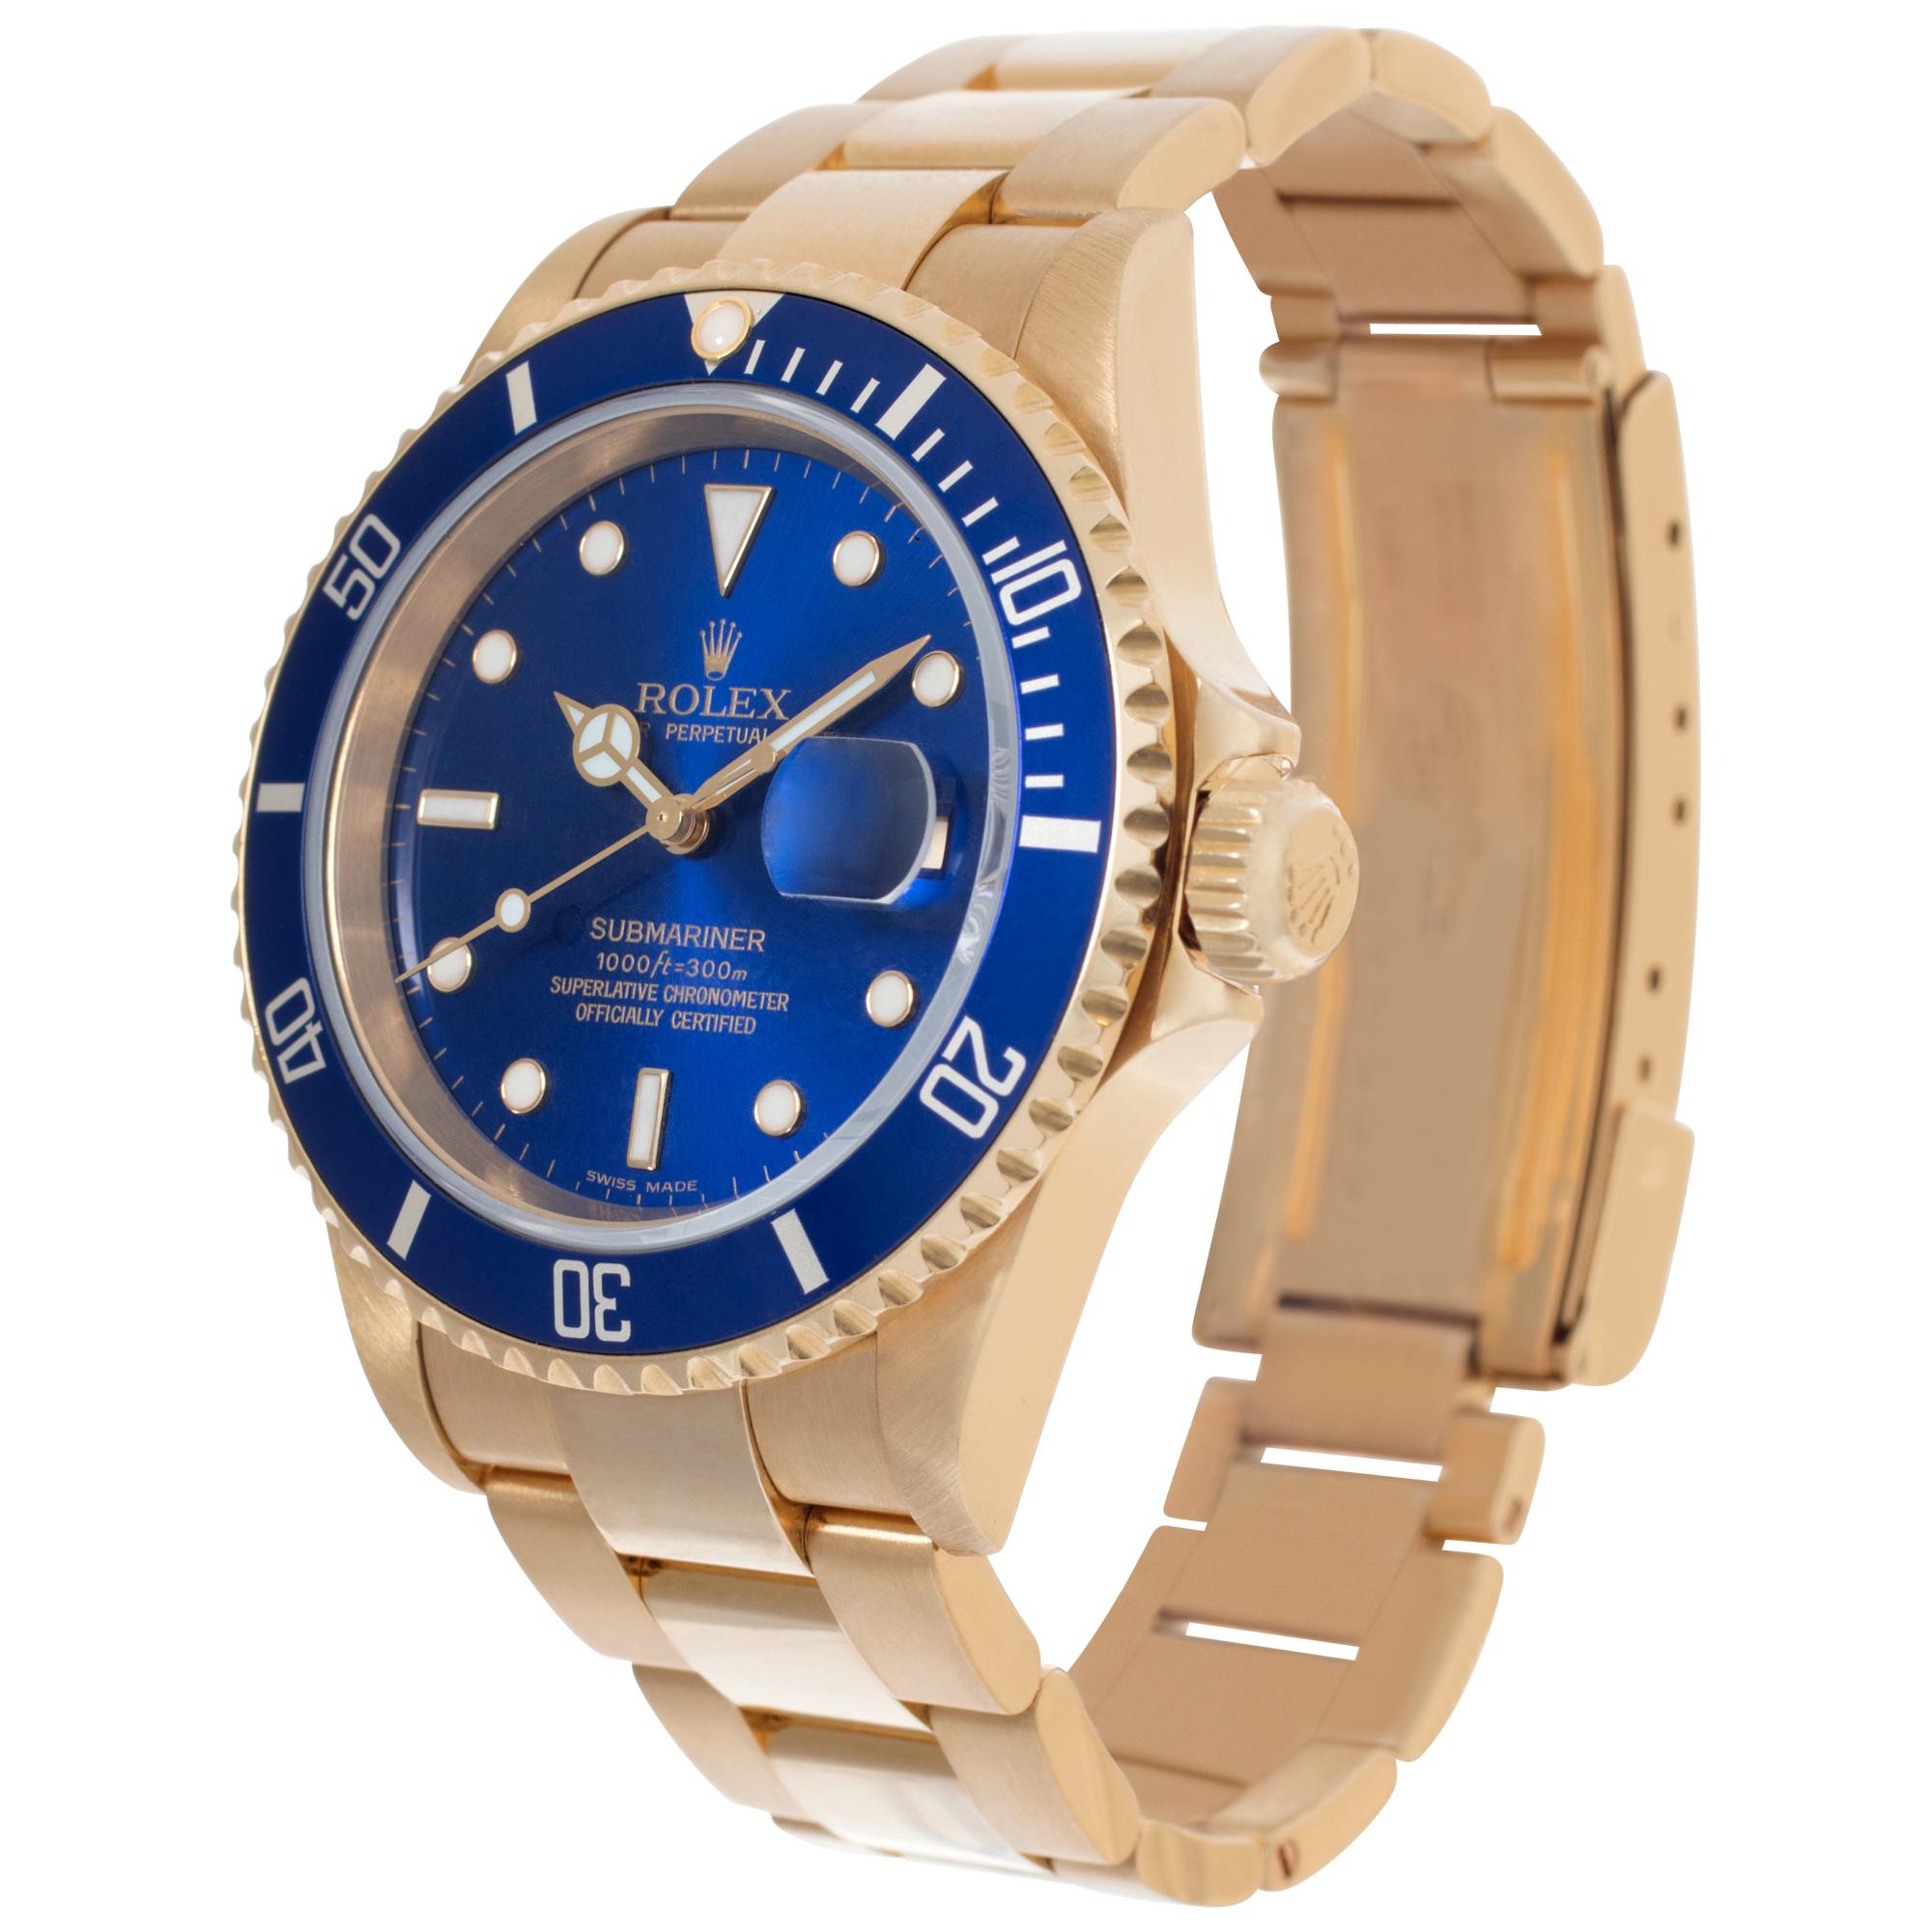 Rolex Submariner in 18k. Auto w/ sweep seconds and date. 40 mm case size. With box, booklets and tags. Ref 16618. Circa 2005. **Bank wire only at this price** Fine Pre-owned Rolex Watch.

Certified preowned Sport Rolex Submariner 16618 watch is made